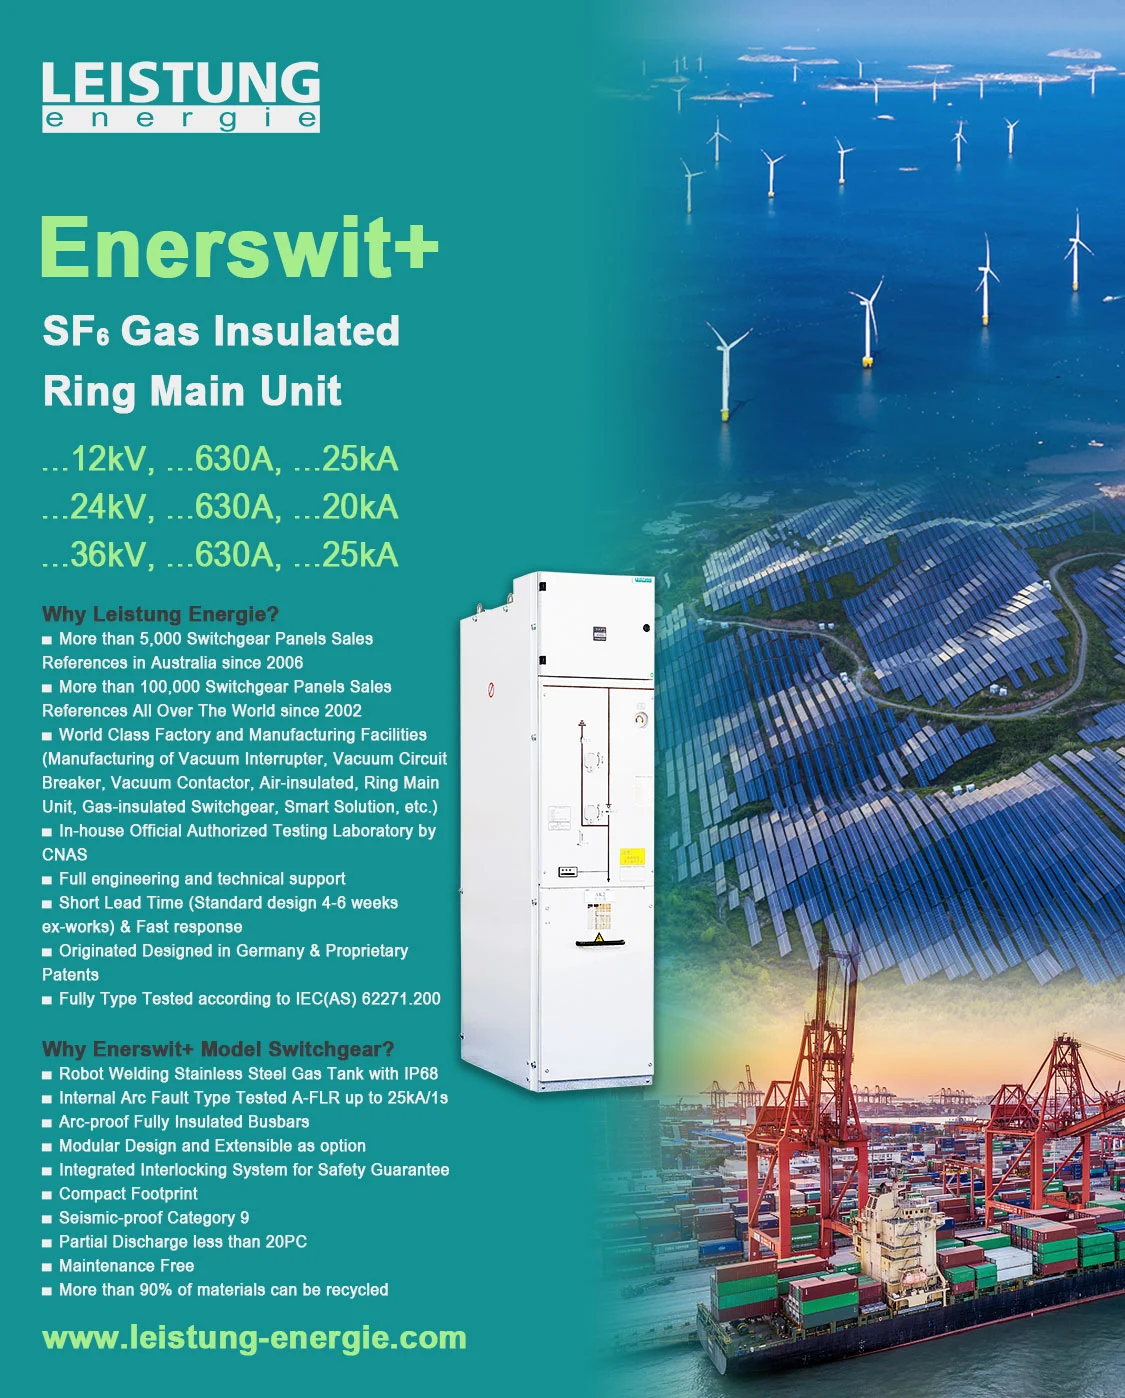 Enerswit+ SF6 Gas-insulated Ring Main Unit